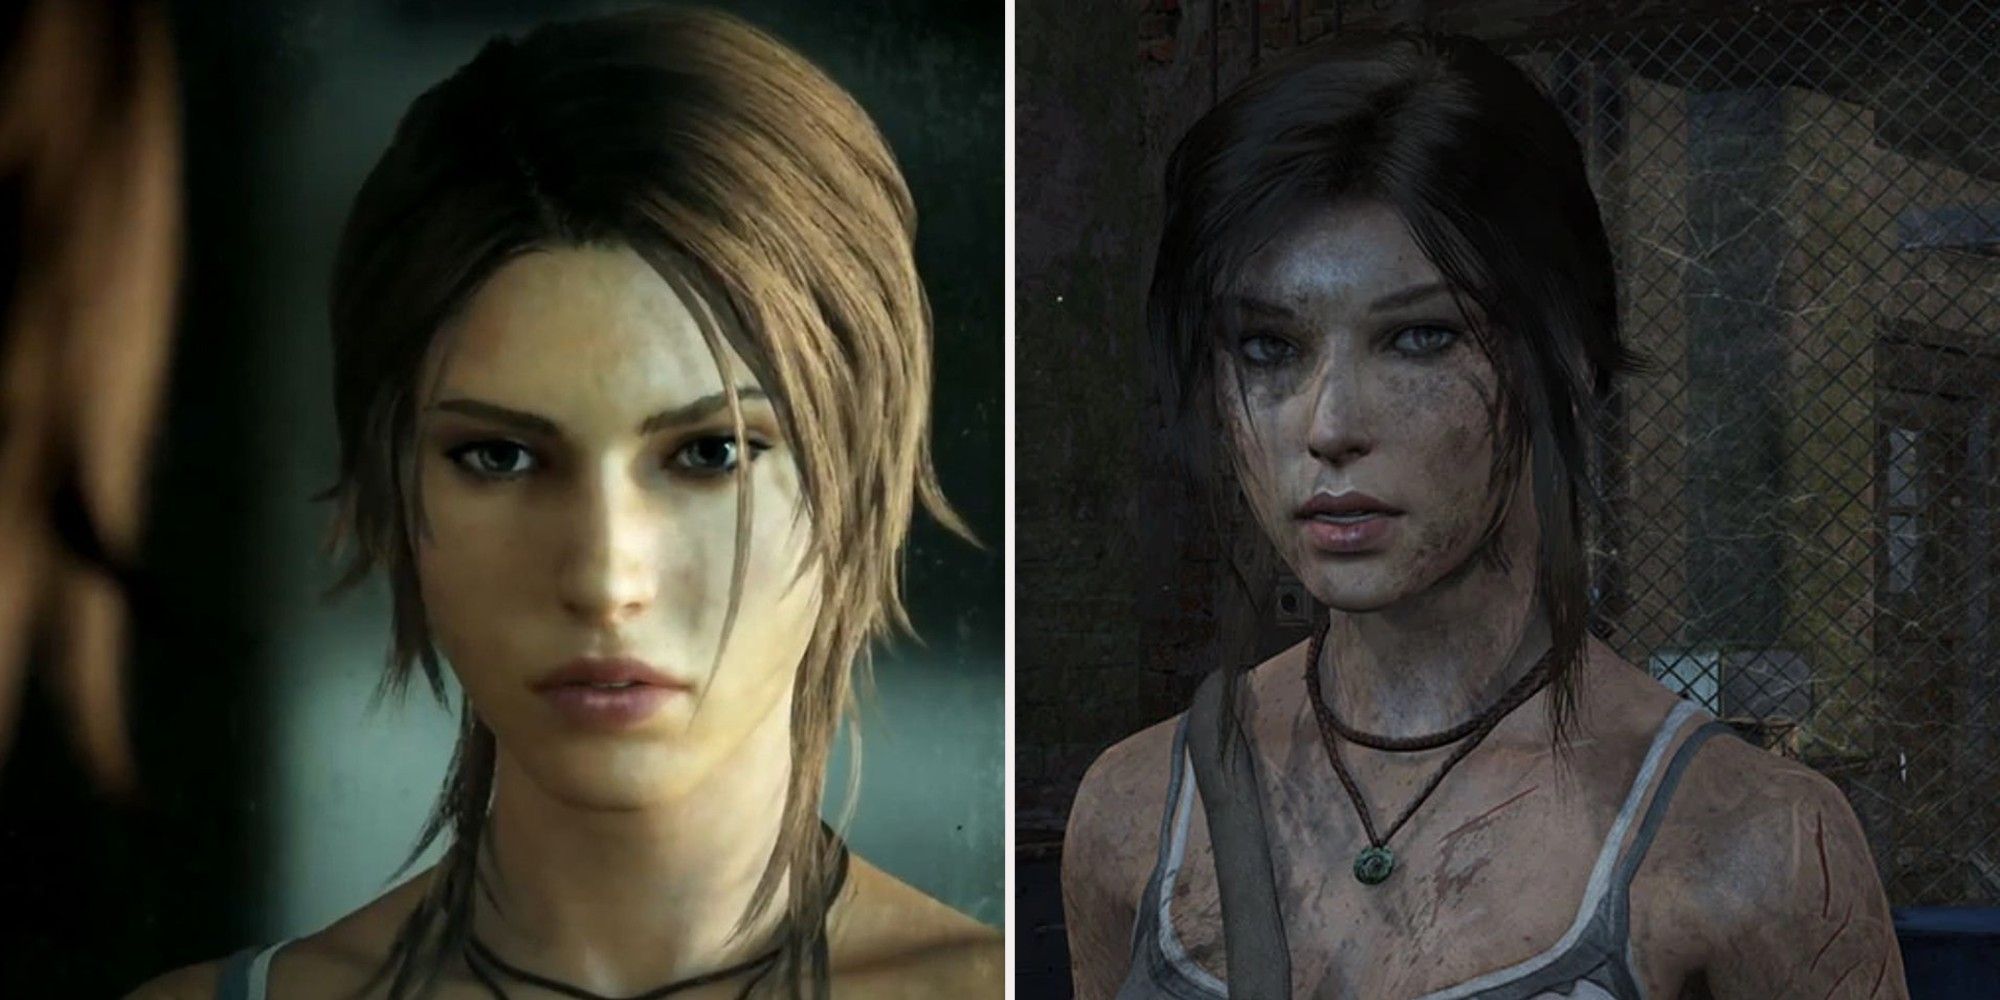 Tomb Raider 2013 - Lara Croft at the beginning of the game and the end